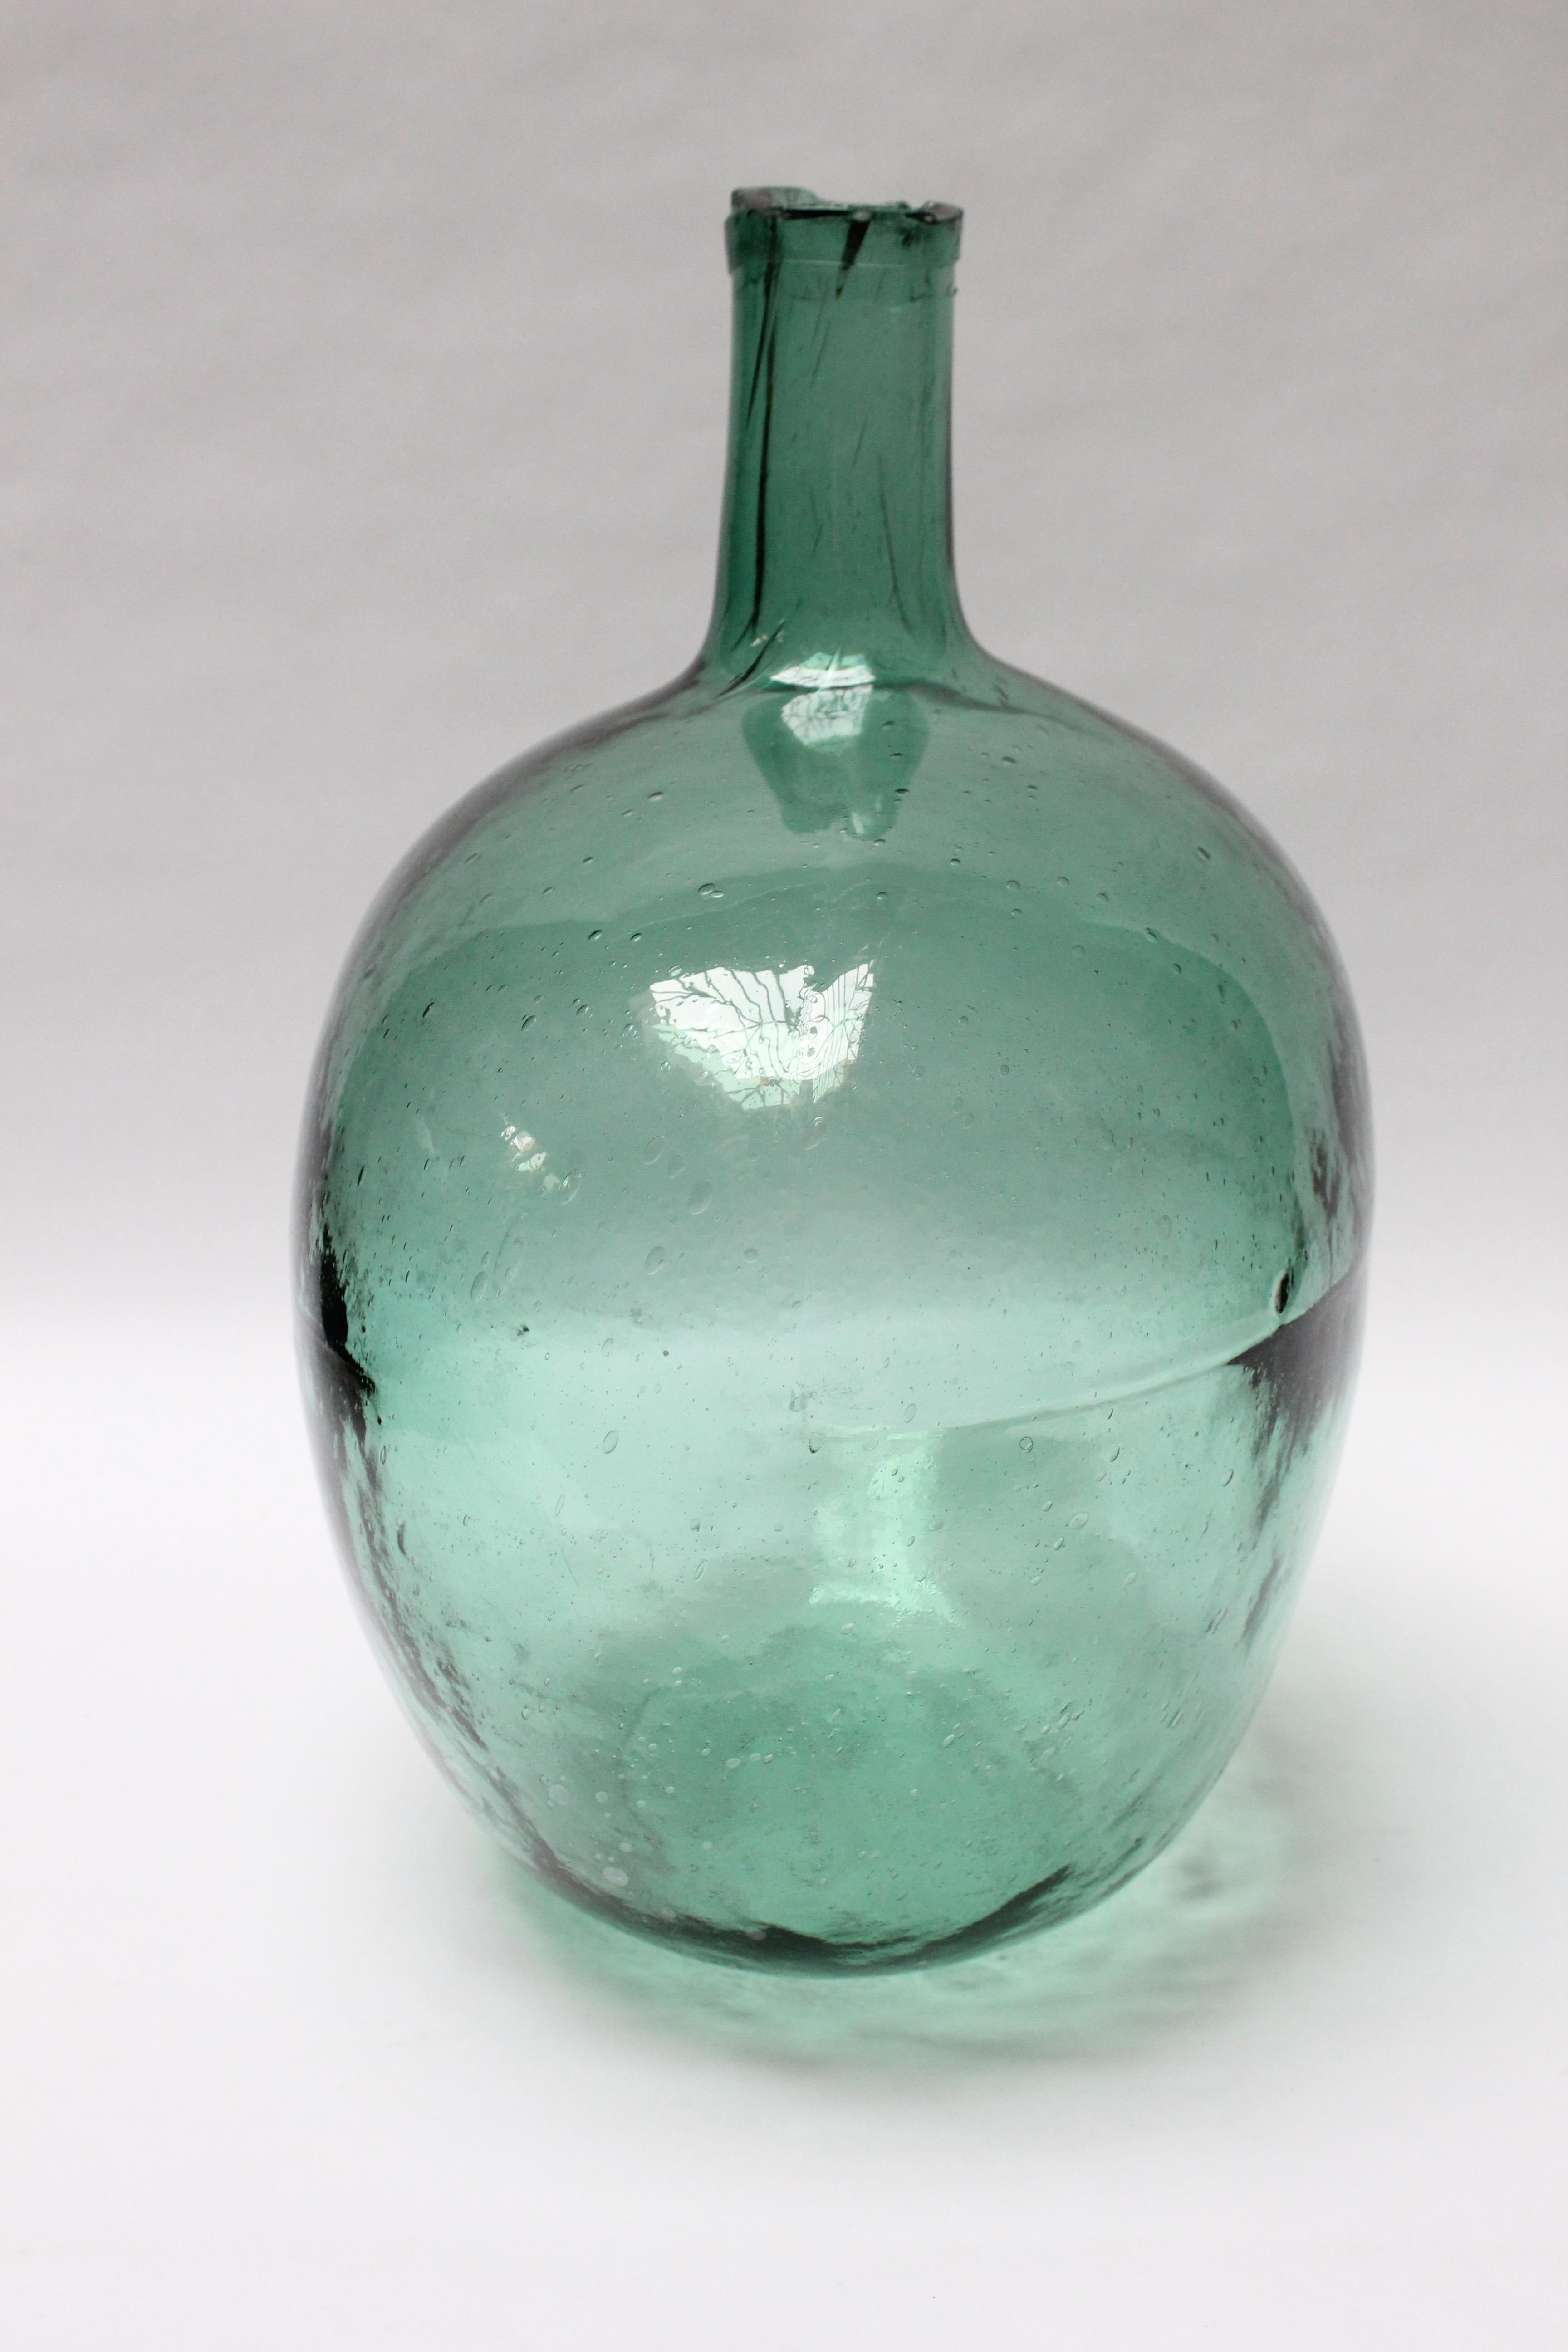 French Demijohn / Carboy originally used for transporting wine (ca. late 19th Century, France). Composed of free-blown seafoam glass exhibiting trapped air bubbles within the glass itself with a sheared lip. Striking color and unique form, measuring